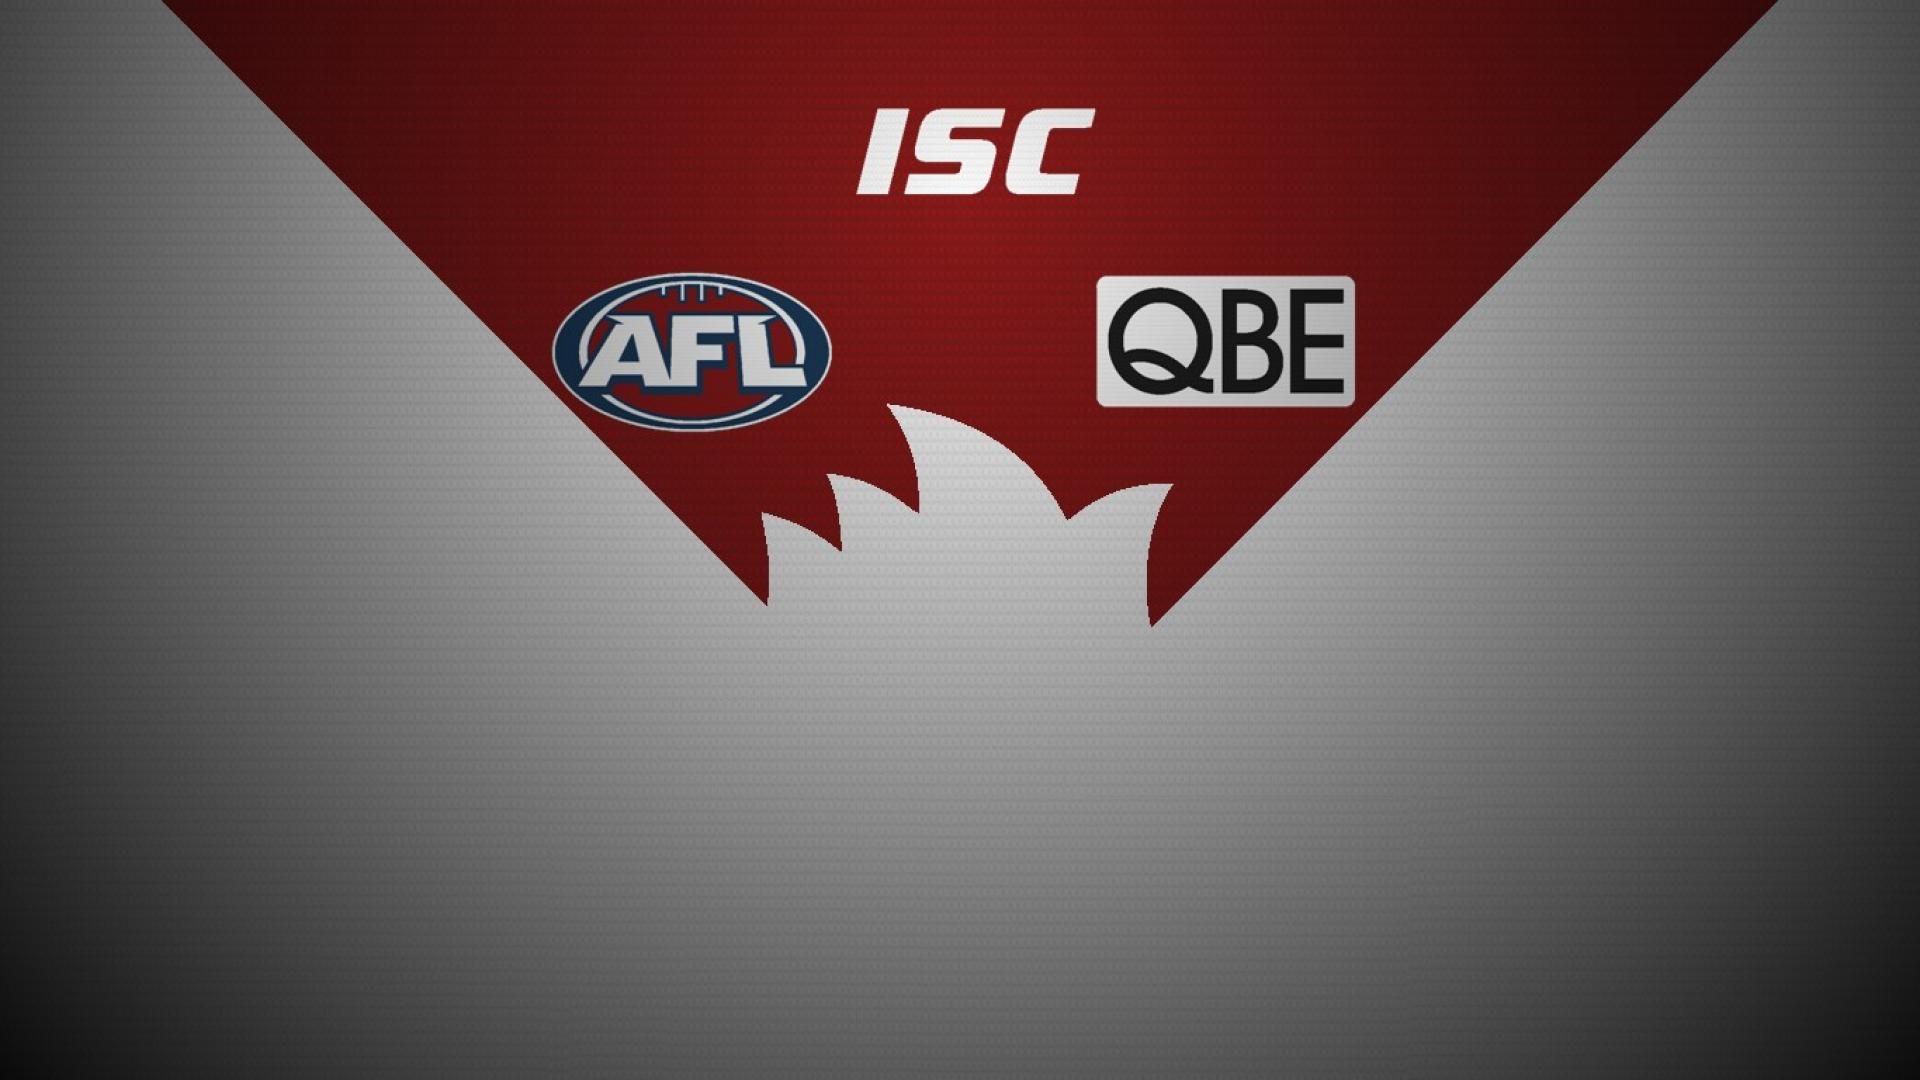 Sydney Swans Wallpapers